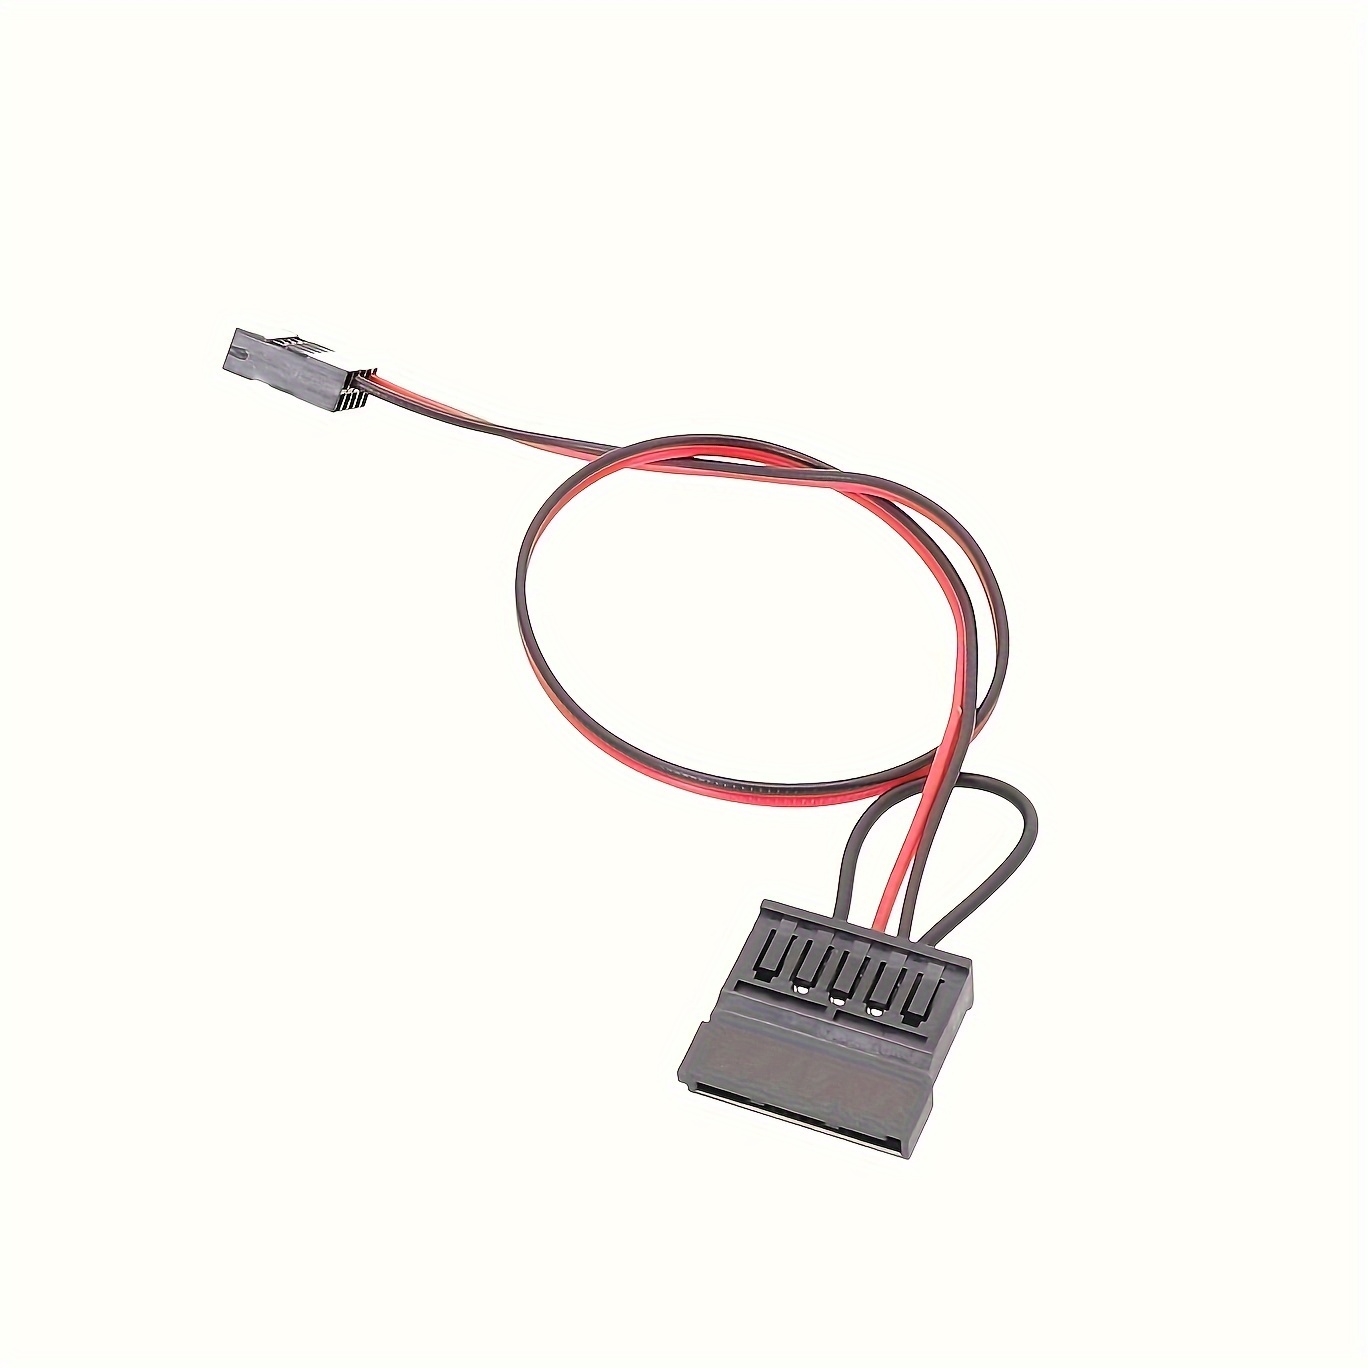 USB To SATA SSD Power Cable for ITX Motherboard USB 9-pin 2.5-inch SATA  Notebook